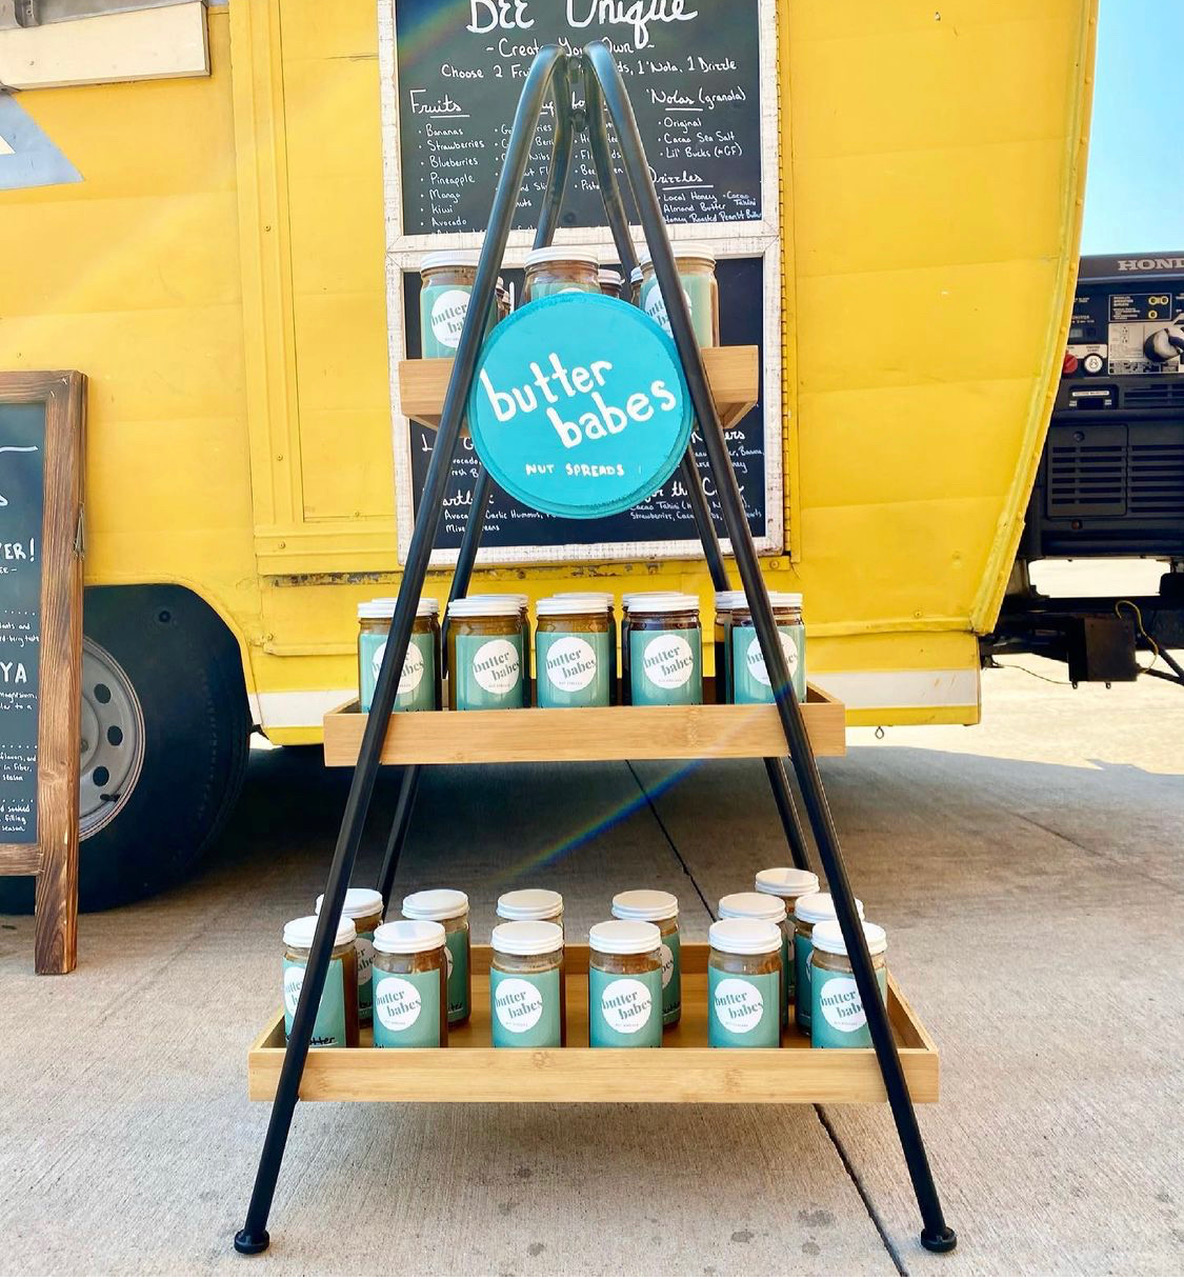 In front of the Just BEE Acai truck, there is a triangular stand holding the glass jars of nut butter from Butter Babes. Photo from Butter Babe's Instagram page.